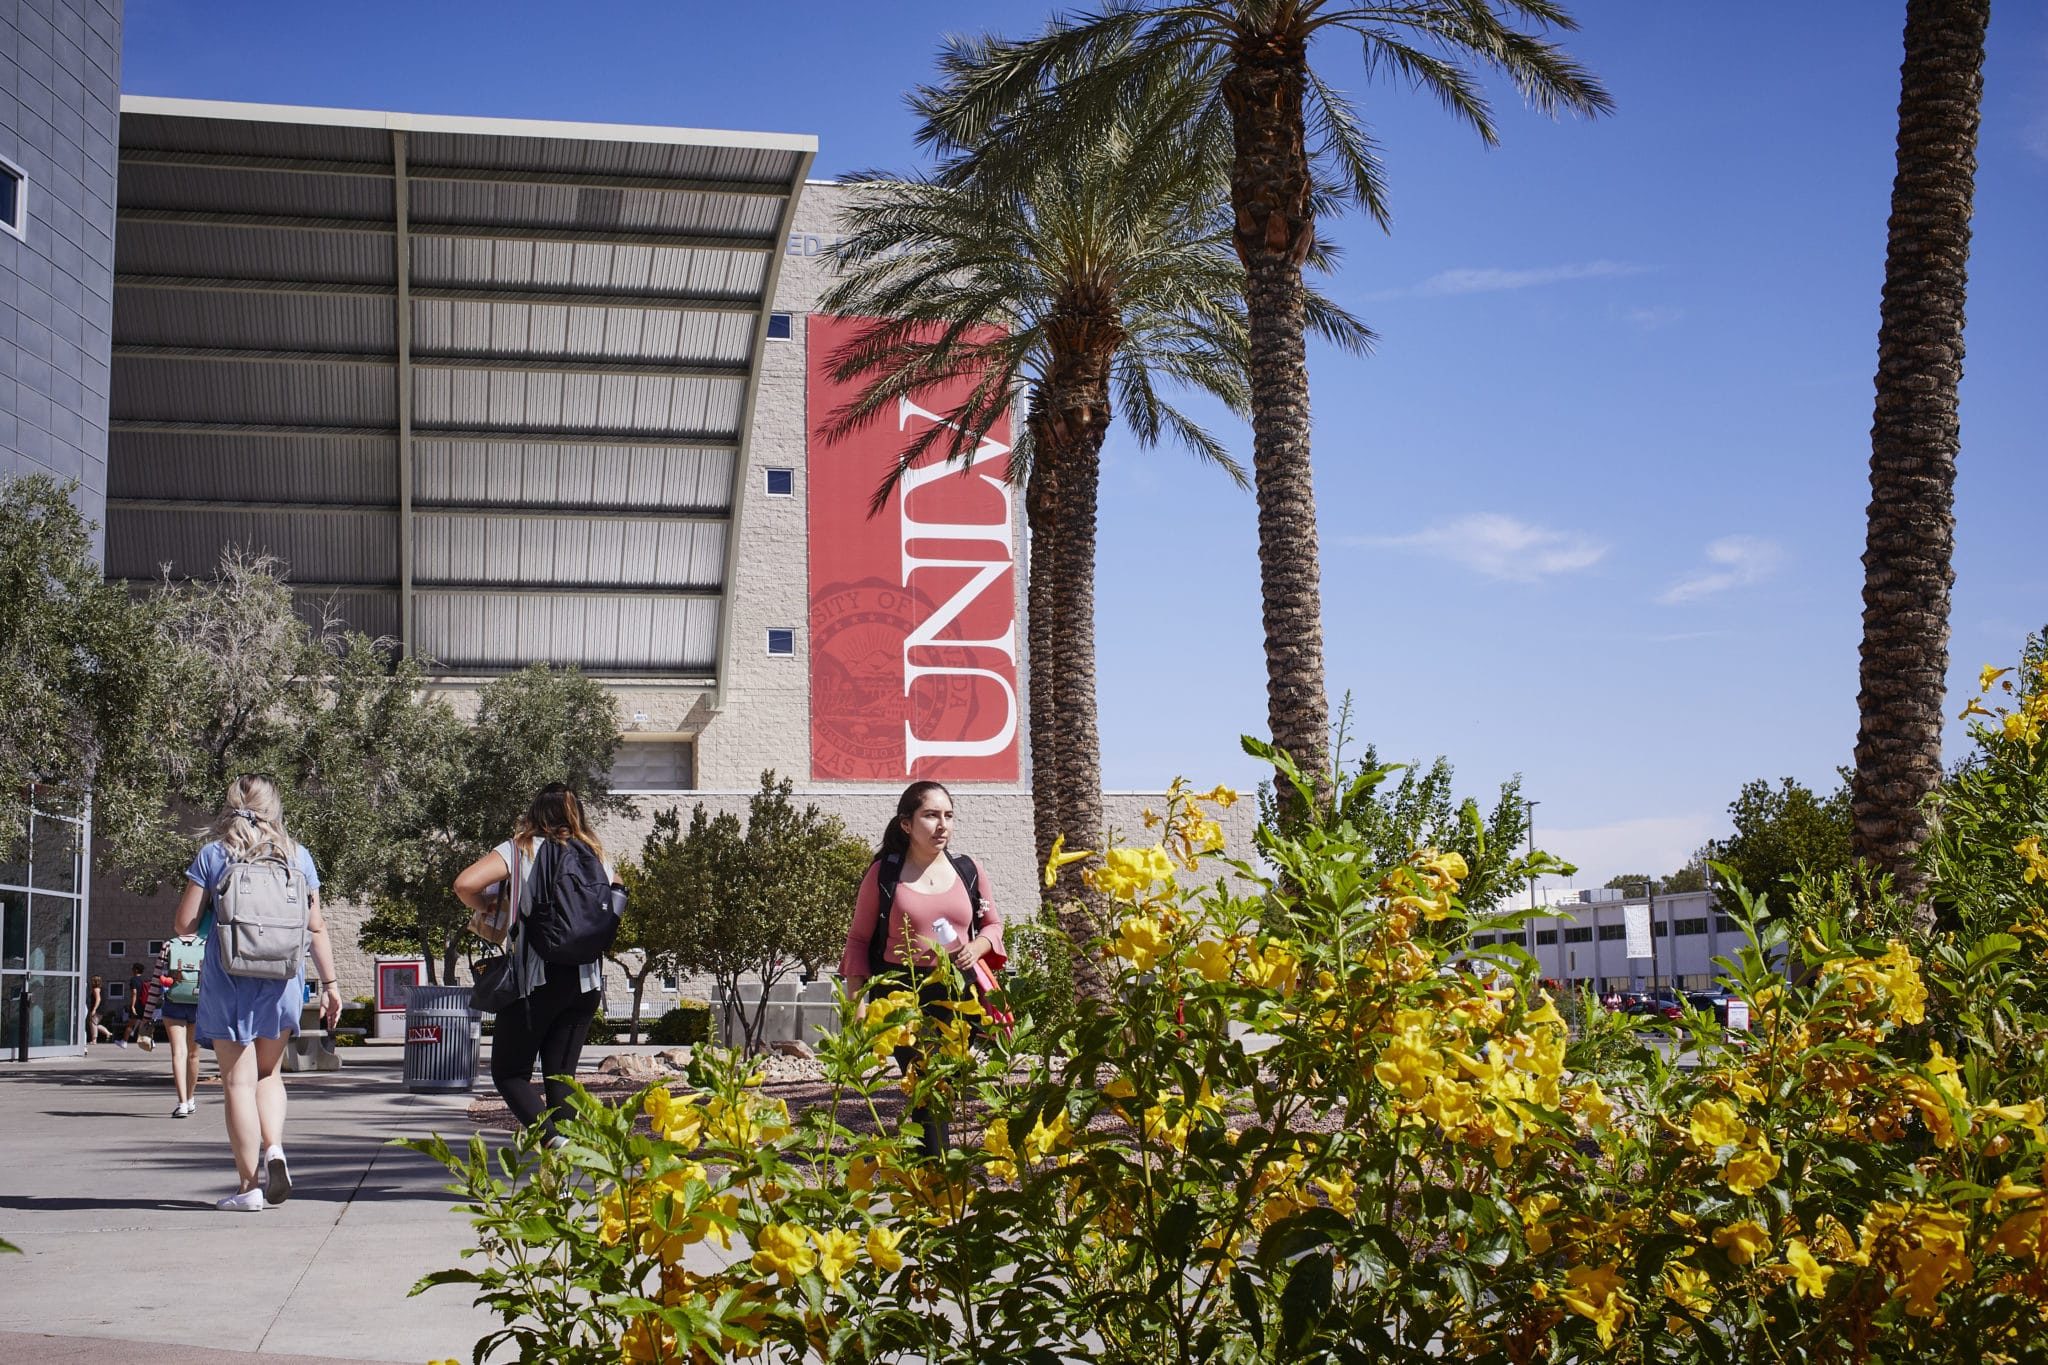 UNLV Launches Faculty Information System to Reduce Administrative Burden, Unlock Time for Teaching and Research